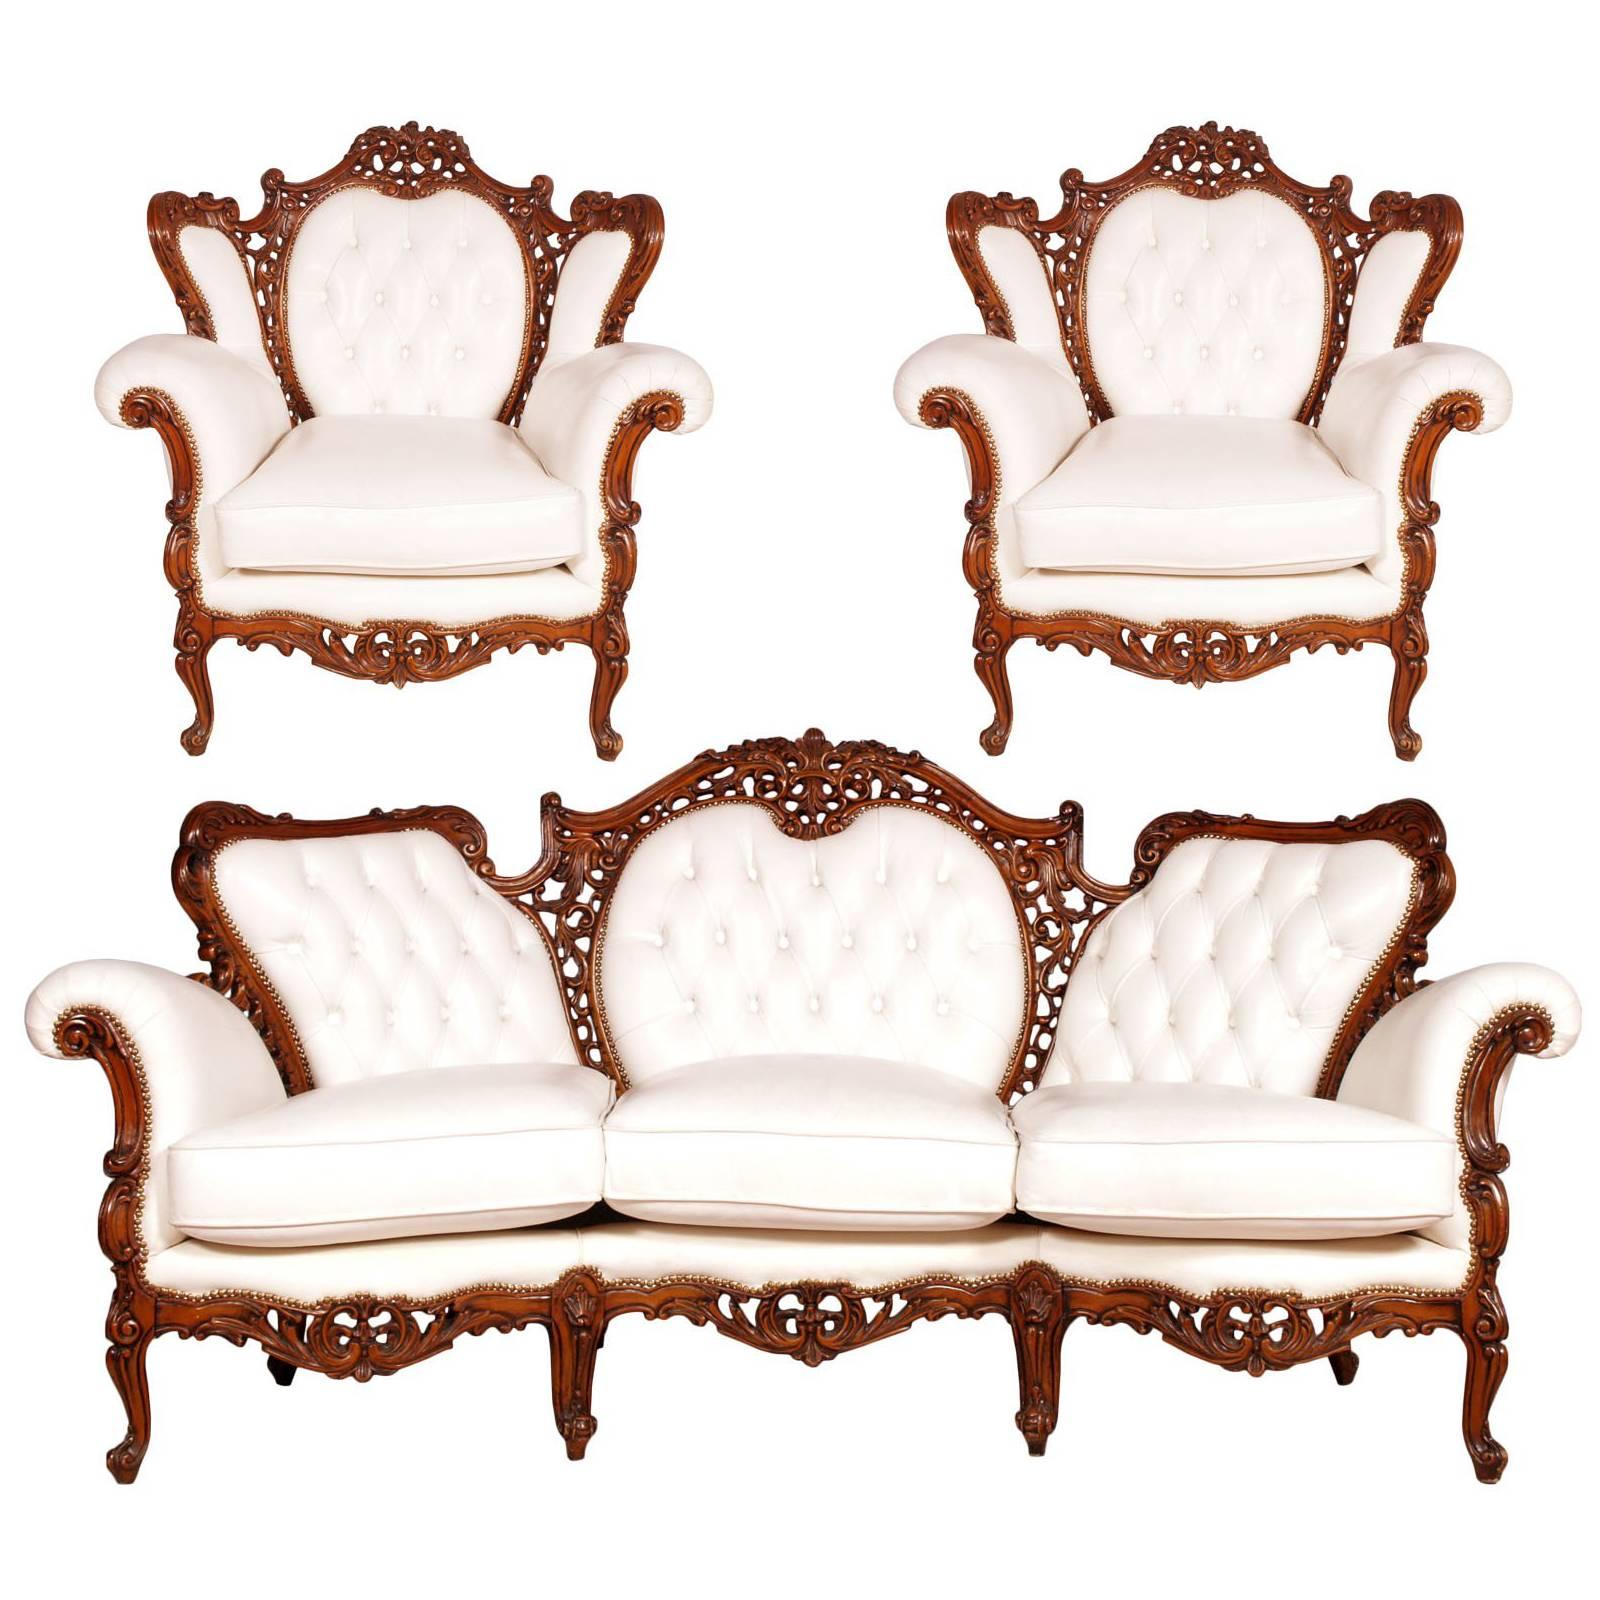 Venetian Rococo Armchairs Sofa set hand-carved walnut , leather upholstered